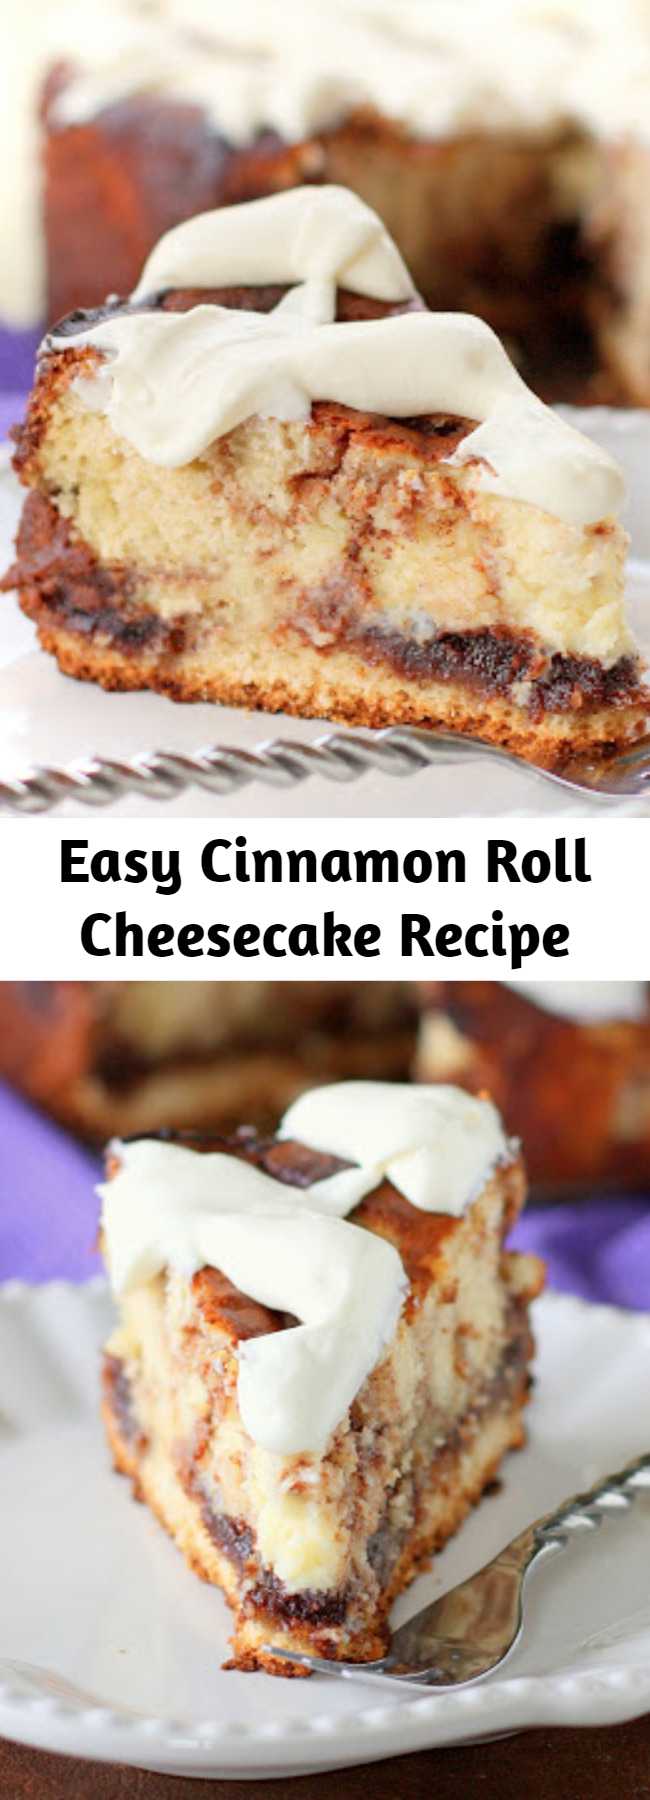 Easy Cinnamon Roll Cheesecake Recipe - This Cinnamon Roll Cheesecake is cheesecake with cinnamon roll dough base and buttery cinnamon swirled throughout. The top is frosted with thick cream cheese frosting.